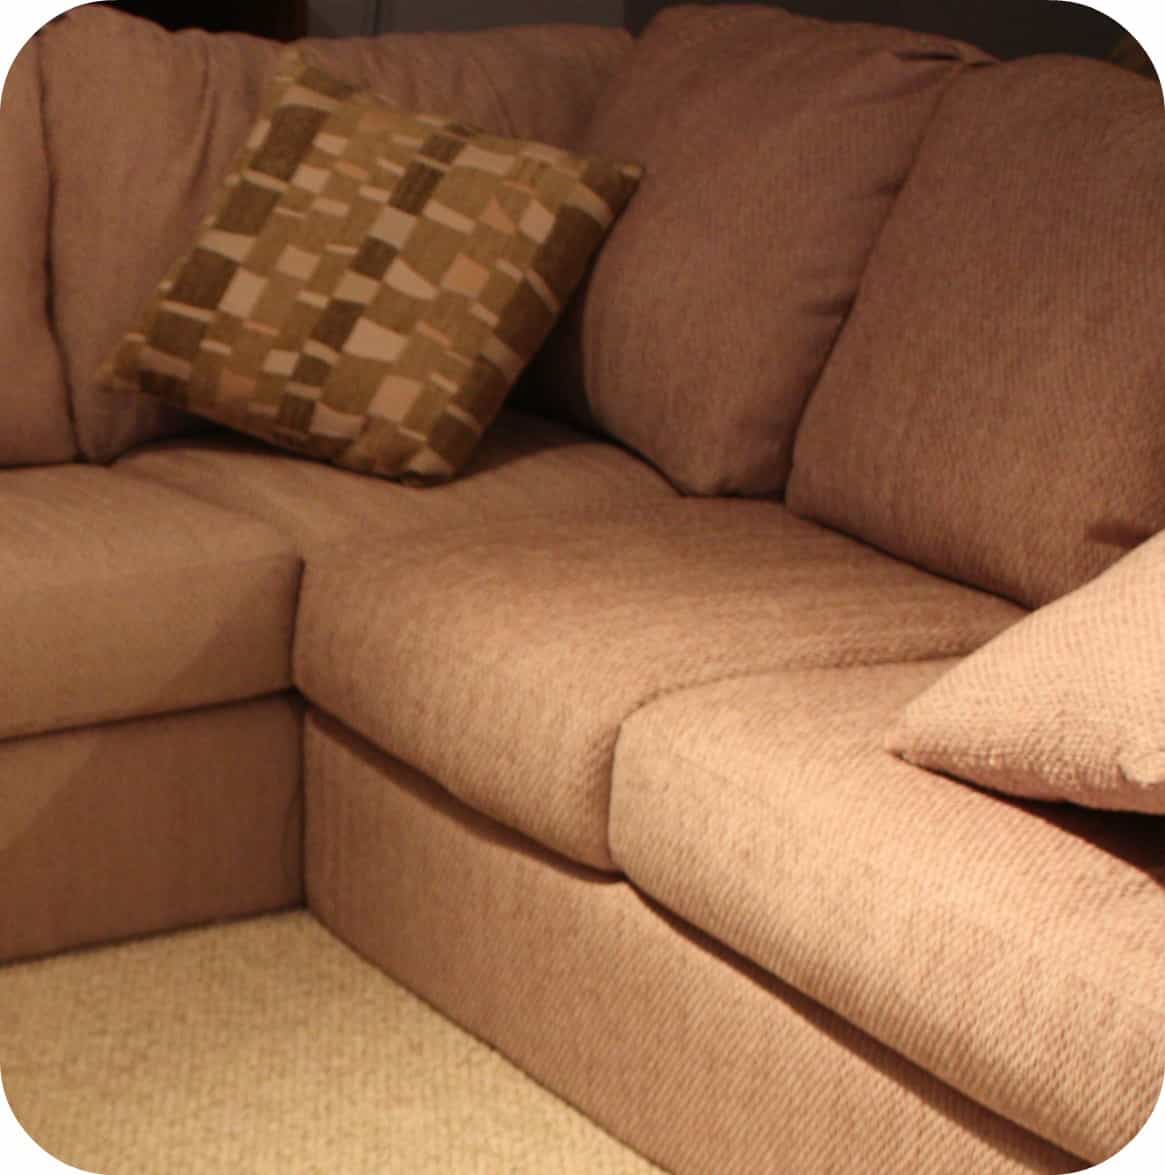 A sofa in a living room